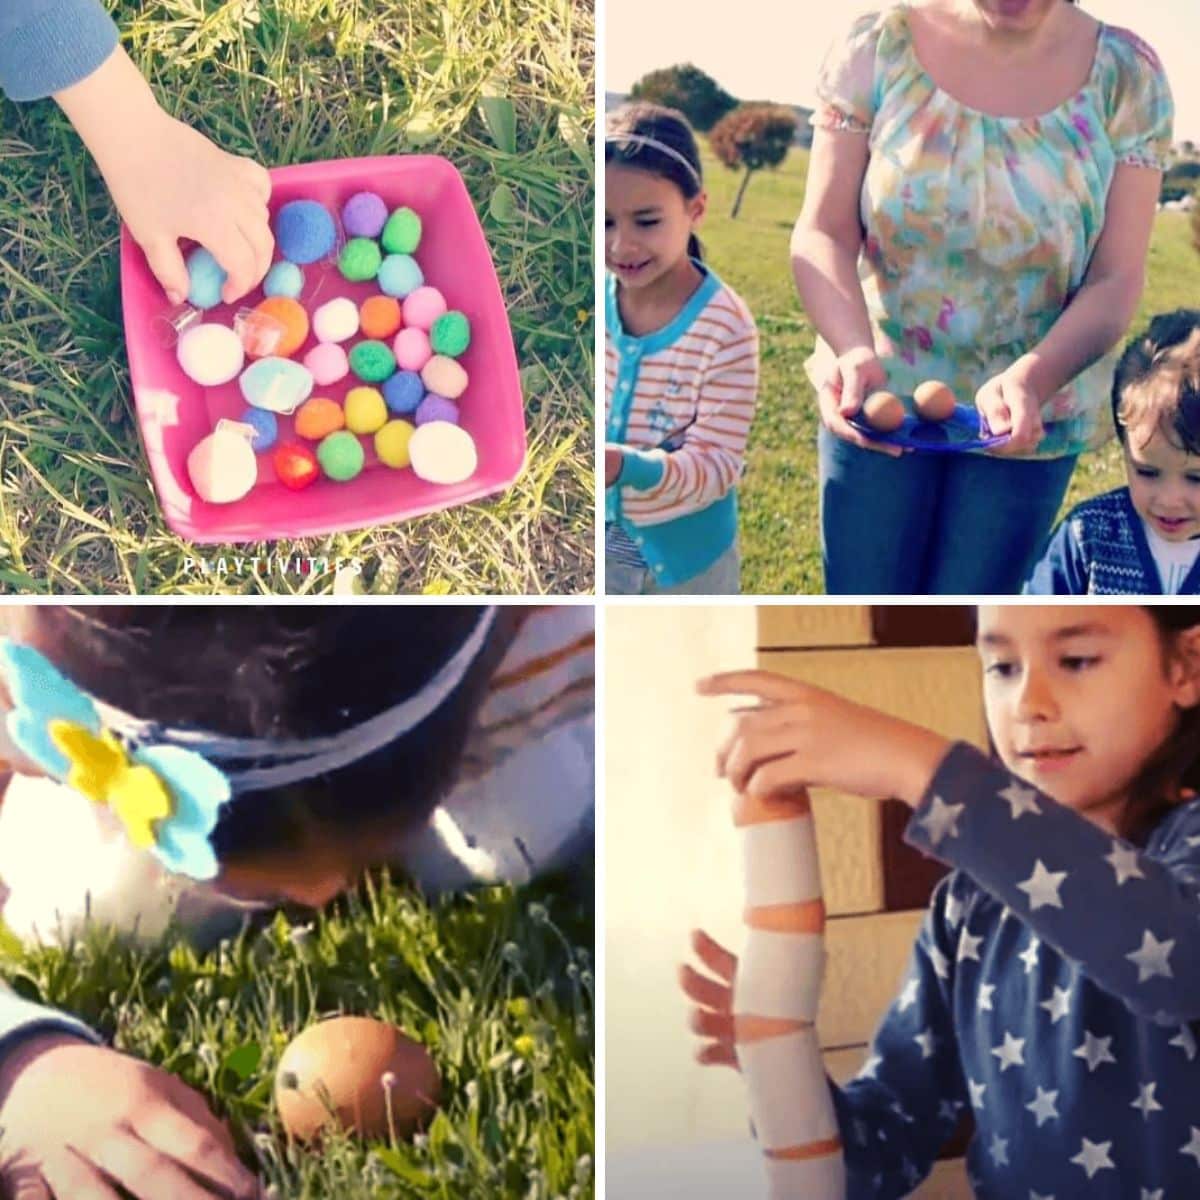 4 images of easter family games to bond.